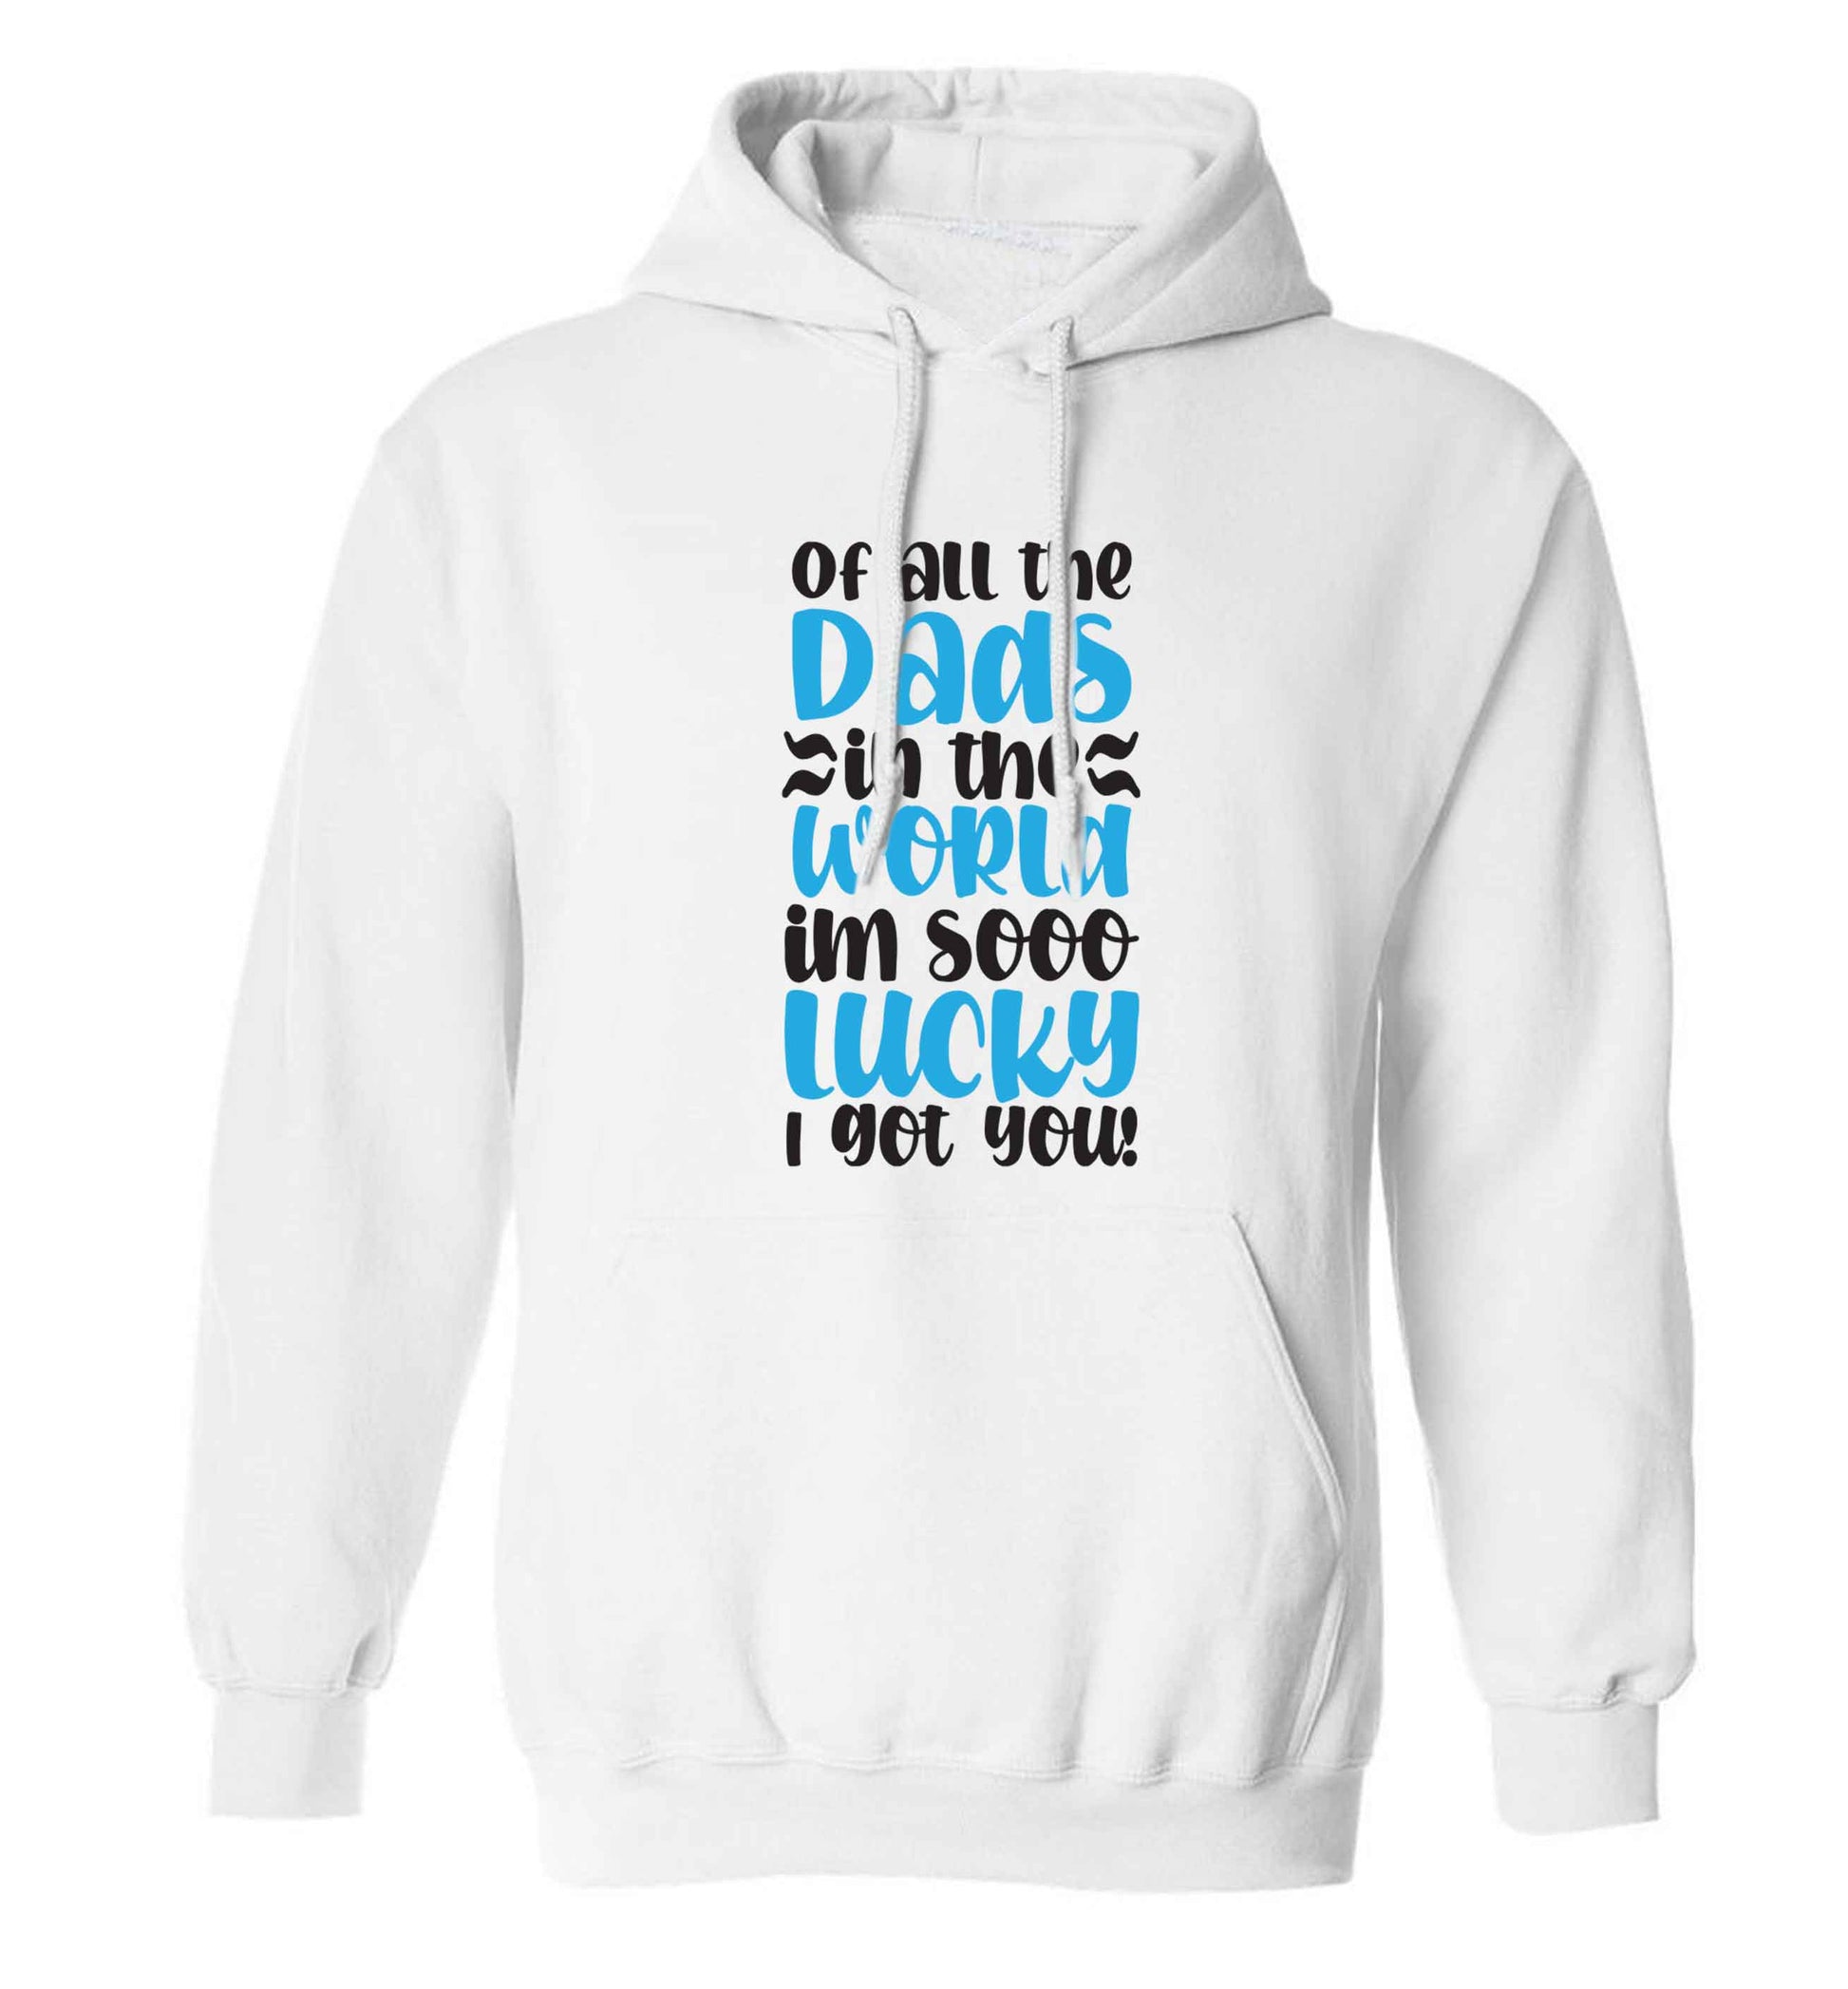 Of all the Dads in the world I'm so lucky I got you adults unisex white hoodie 2XL